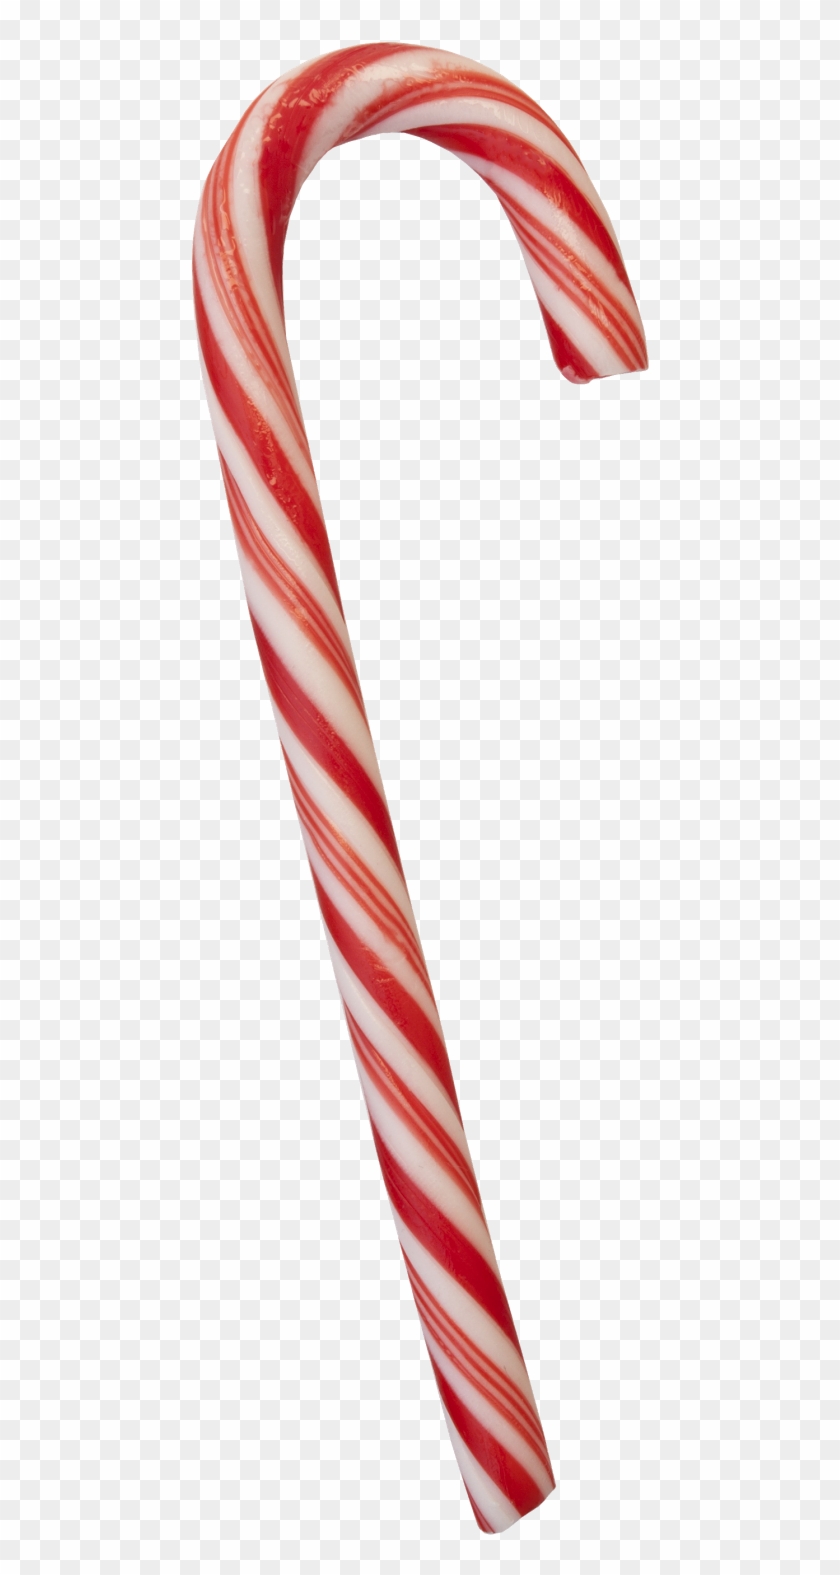 Candy Cane Transparent Background #527655